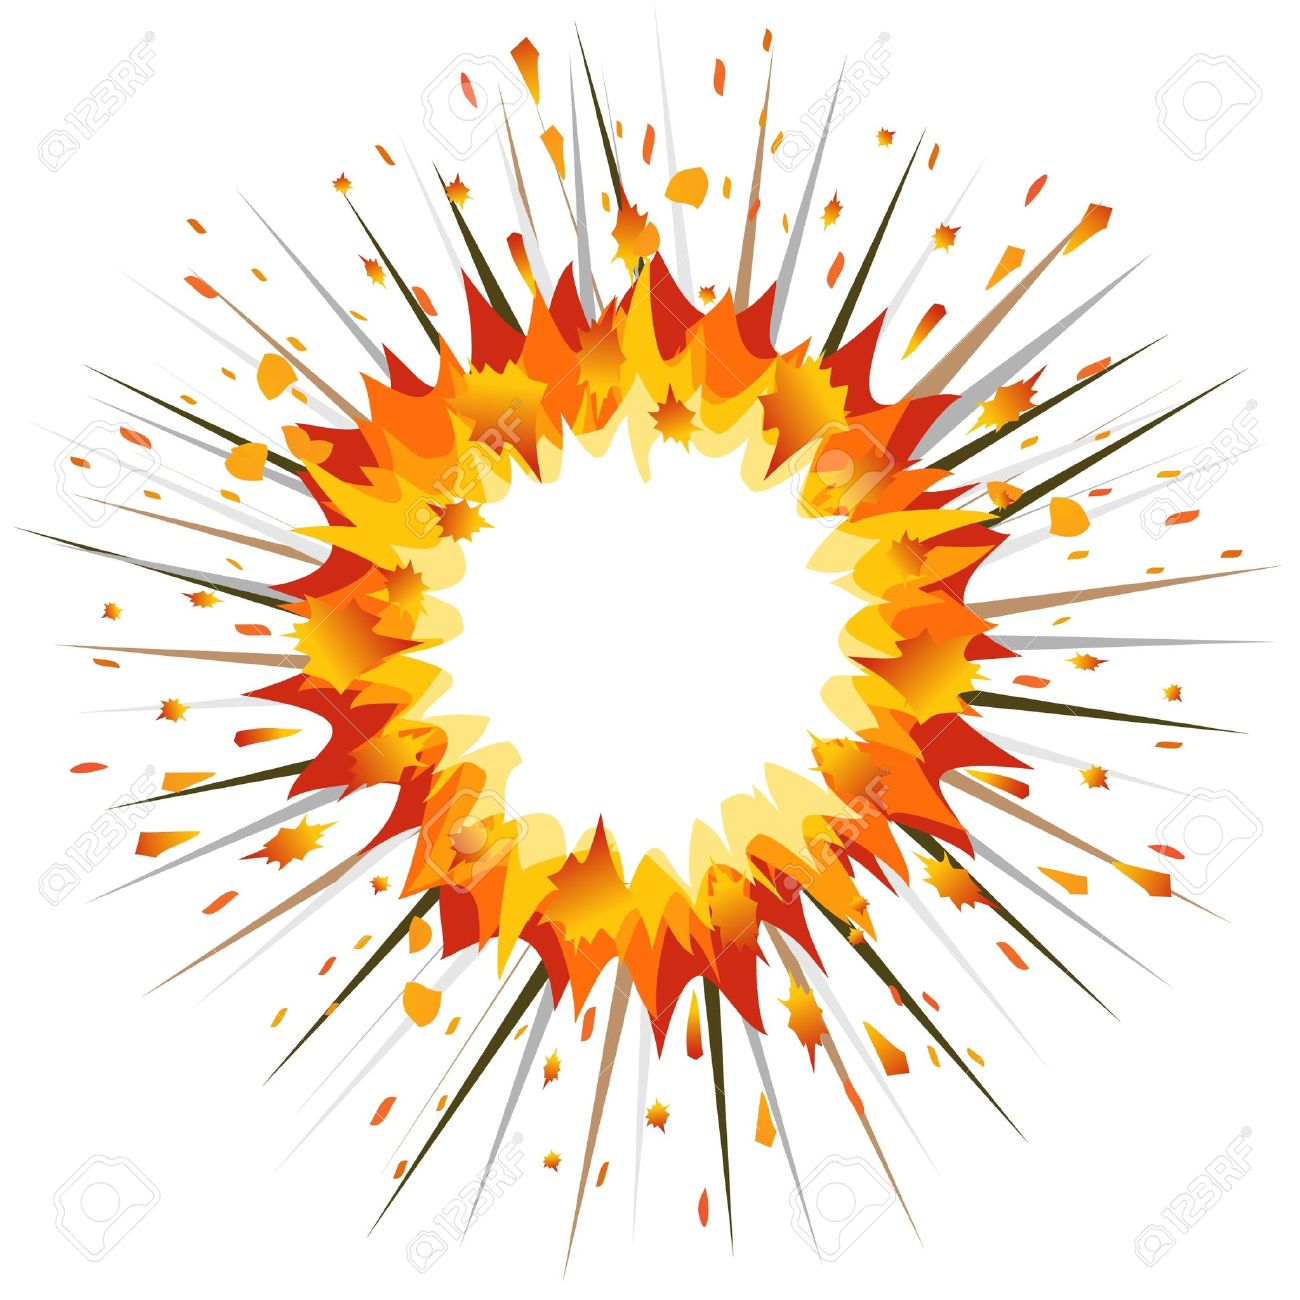 Free Realistic Explosion Cliparts, Download Free Clip Art